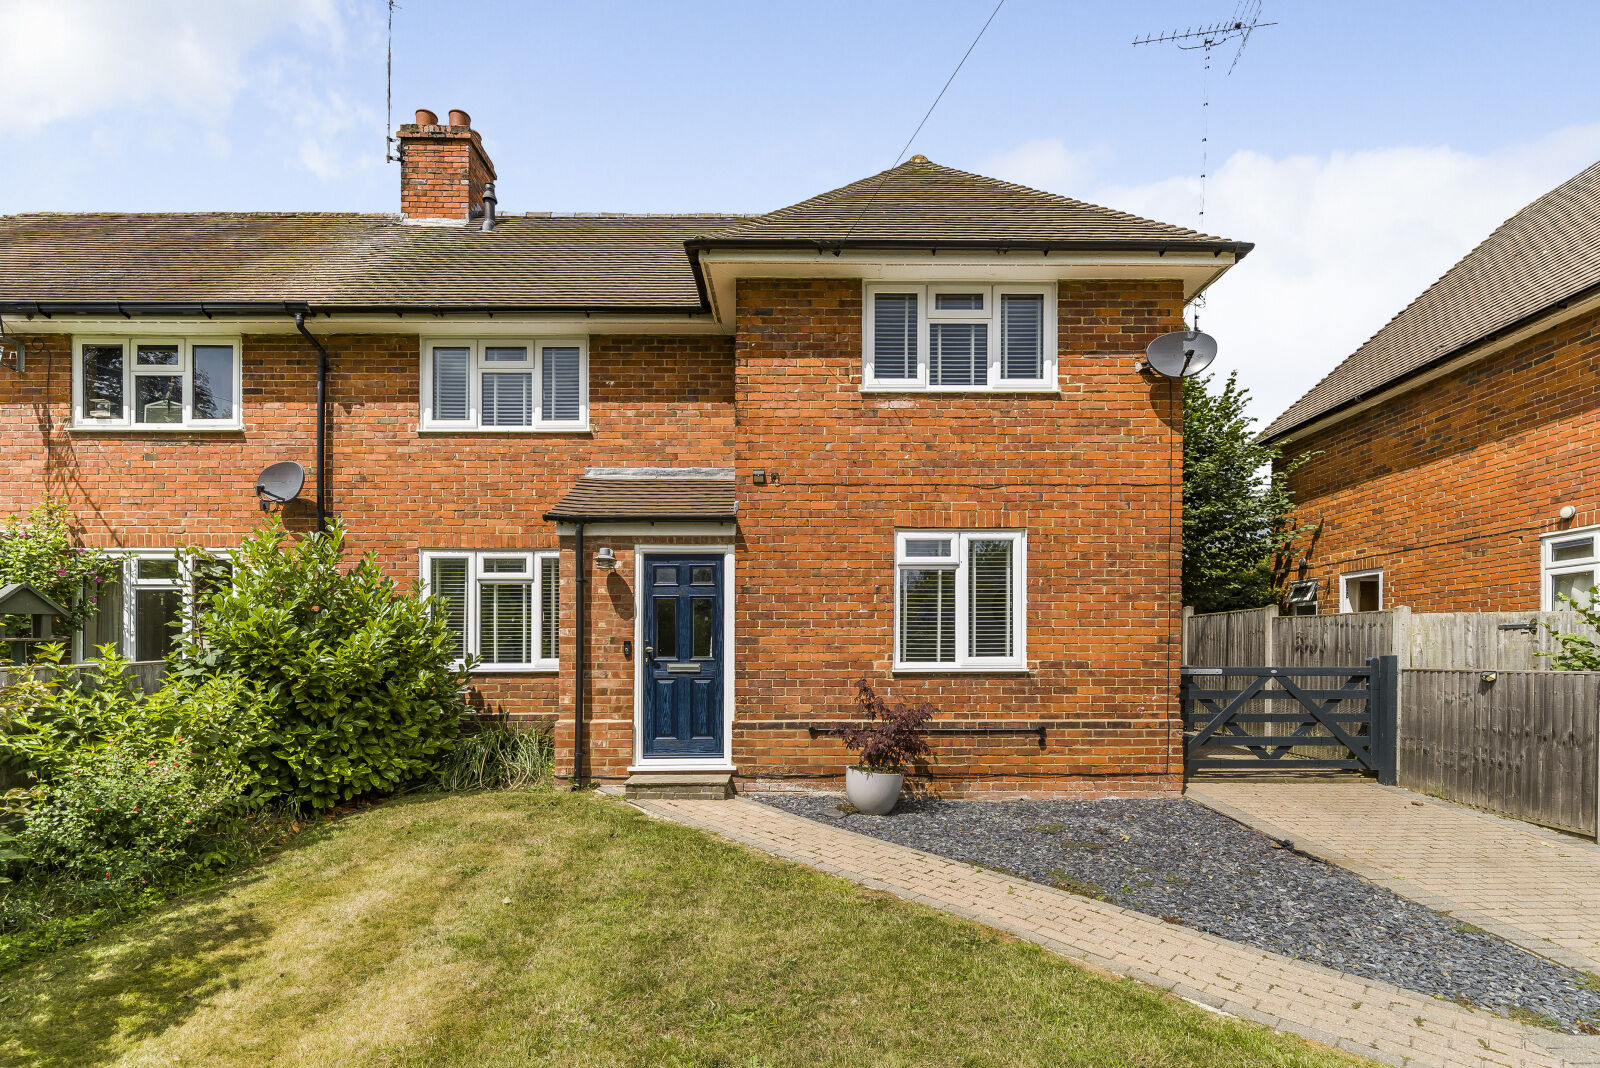 3 bedroom semi detached house for sale London Road, Ruscombe, RG10, main image